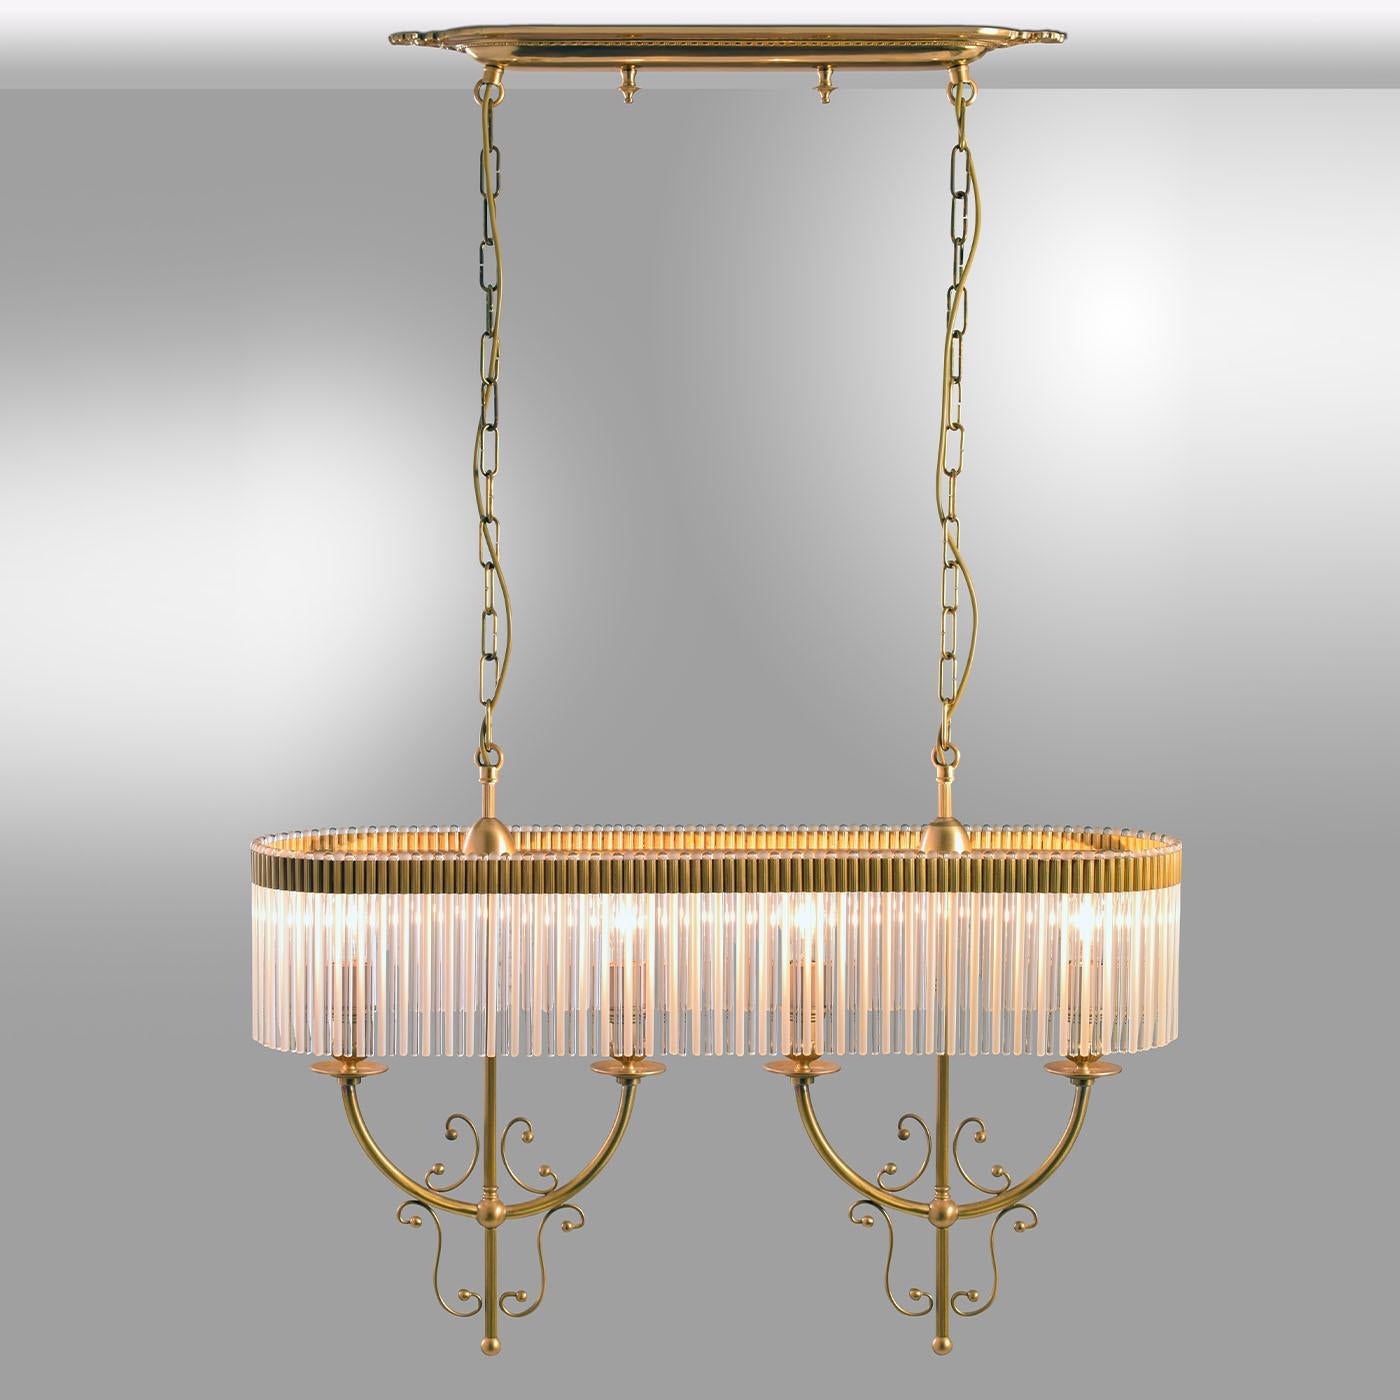 Neatly juxtaposed transparent glass reeds distinguish the plush design of this chandelier designed by Luca Bussacchini for the Seicento Collection, also available in a two-light variant. The reeds create an oval-cut shade diffusing and reflecting